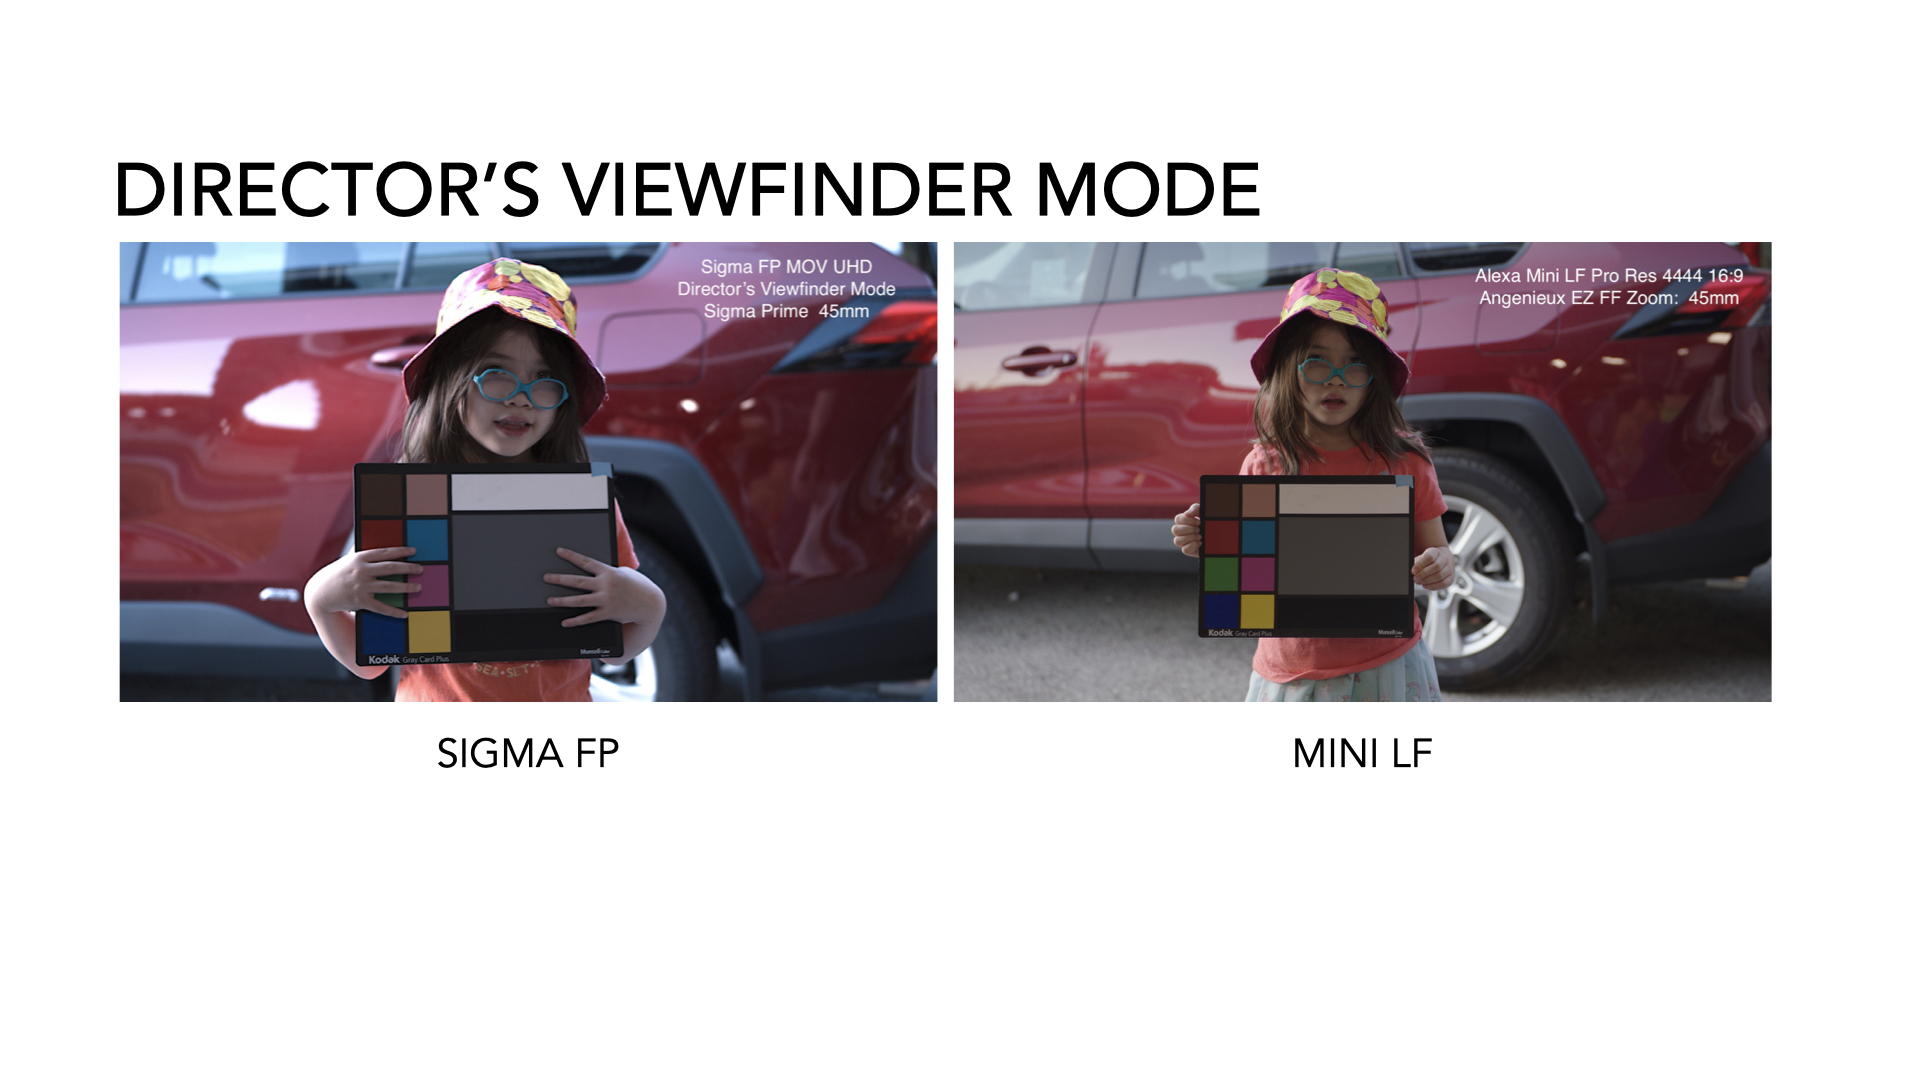 fp case study: Director's Viewfinder Mode